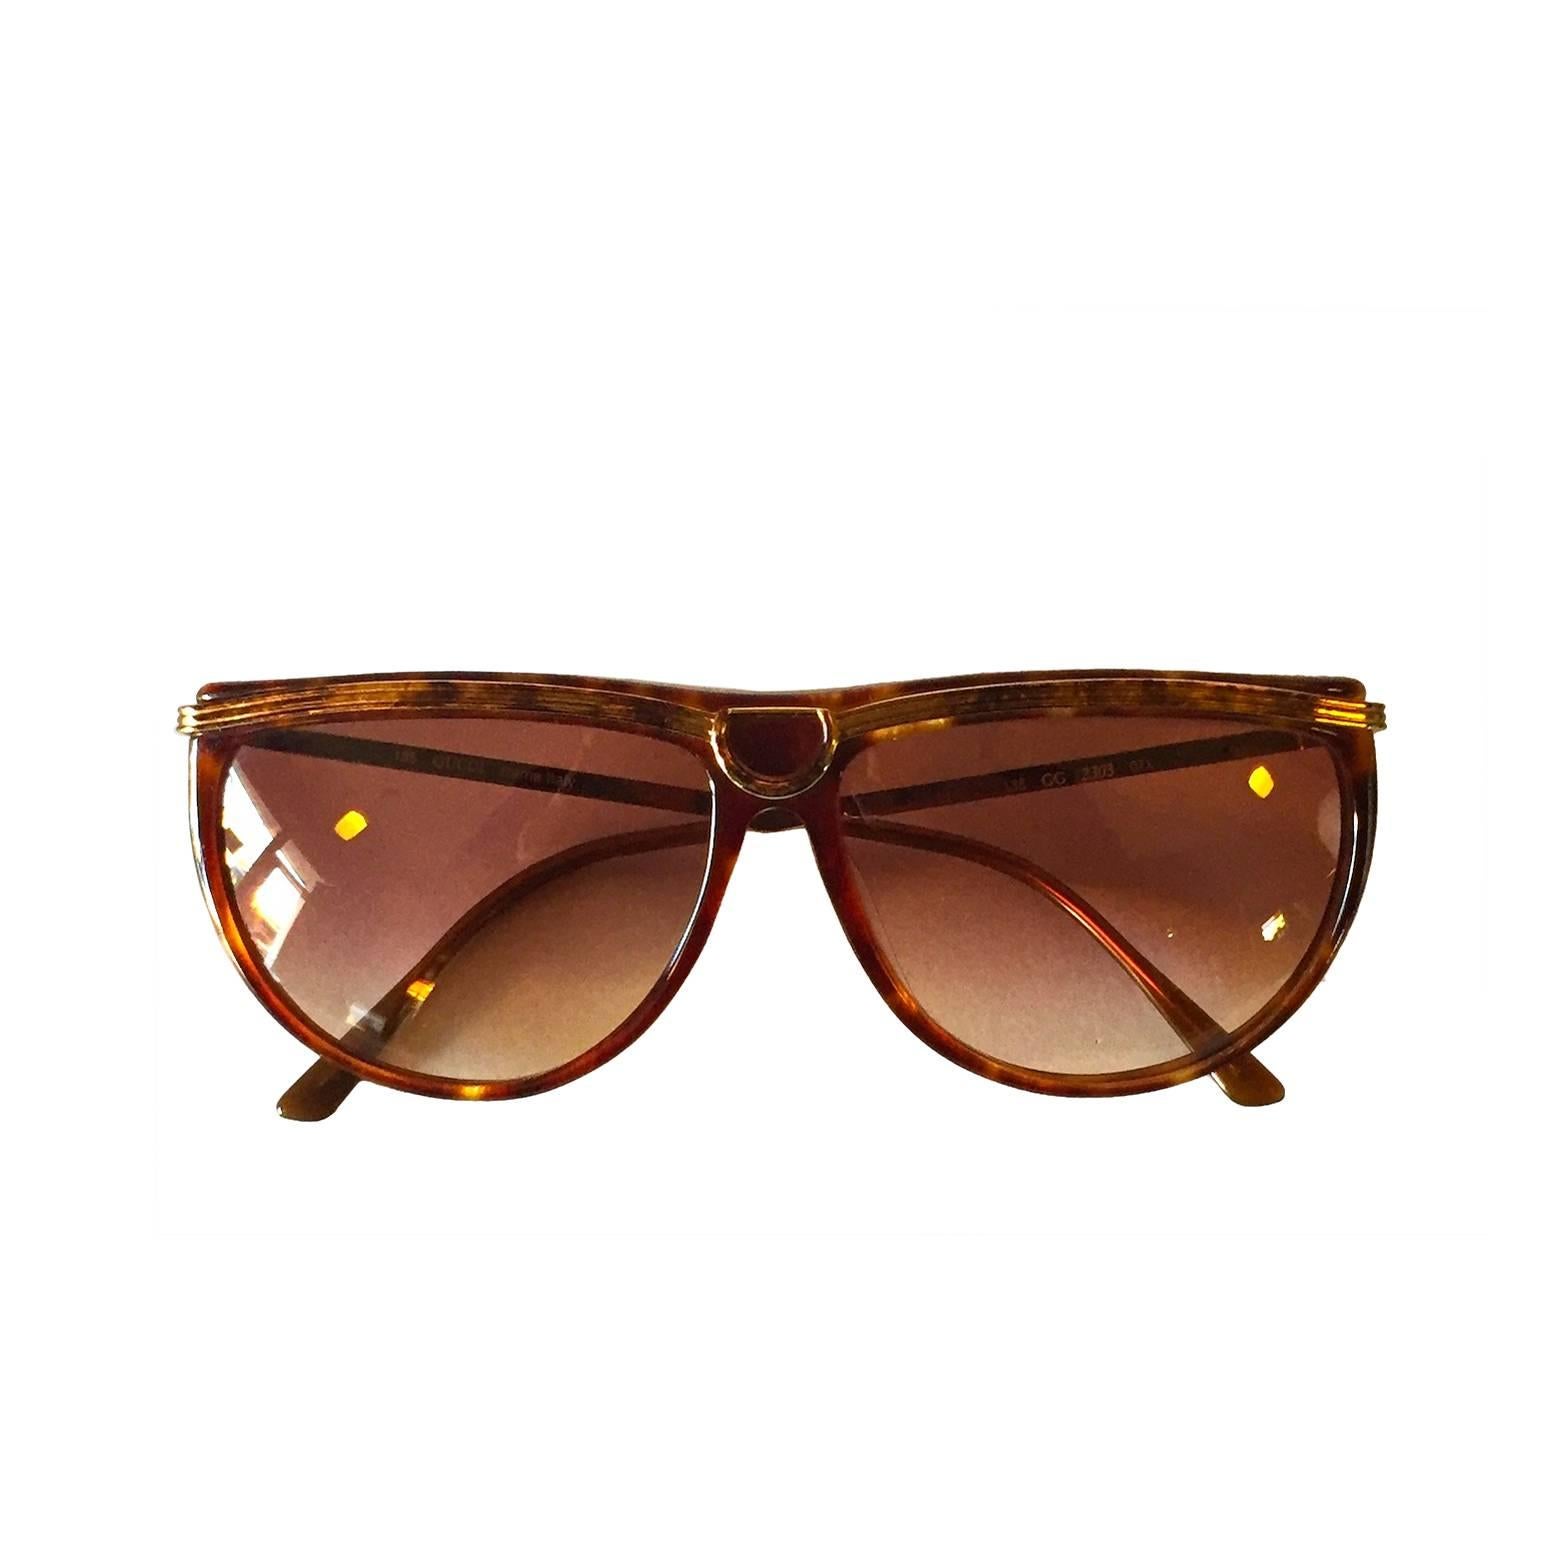 Original 1980s Vintage Gucci Sunglasses in Tortoise color with Metal Sides